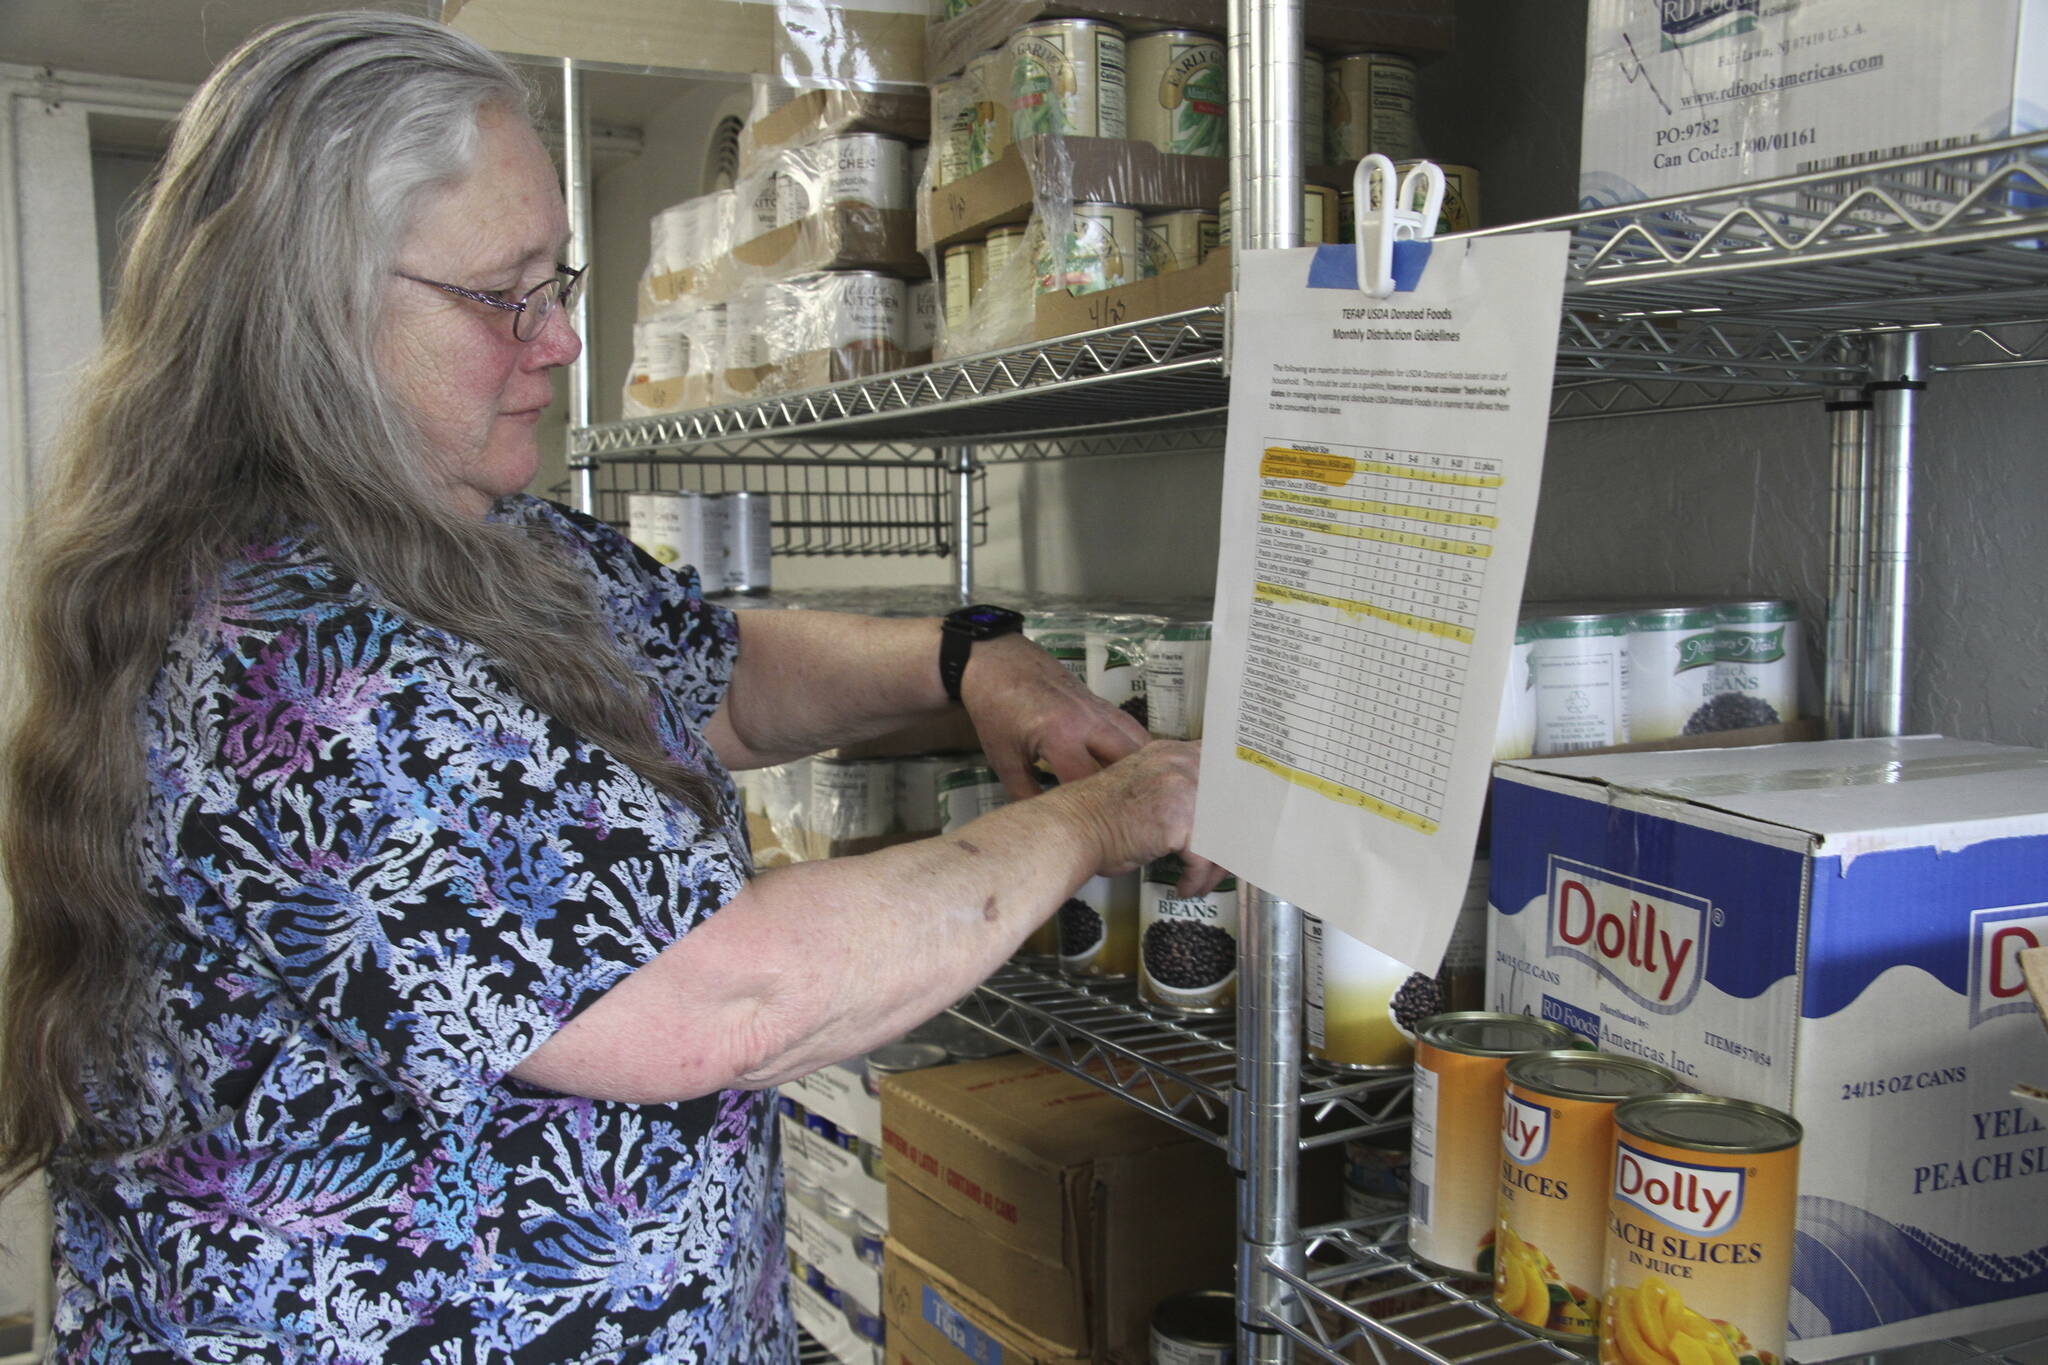 Rose Carney organizes supplies at the food pantry at Harvest Christian Fellowship Church in Eagle River, Alaska, on April 17, 2023. Carney and thousands of Alaskans who depend on government assistance have not received food stamps for months, exacerbating a hunger crisis. (AP Photo/Mark Thiessen)